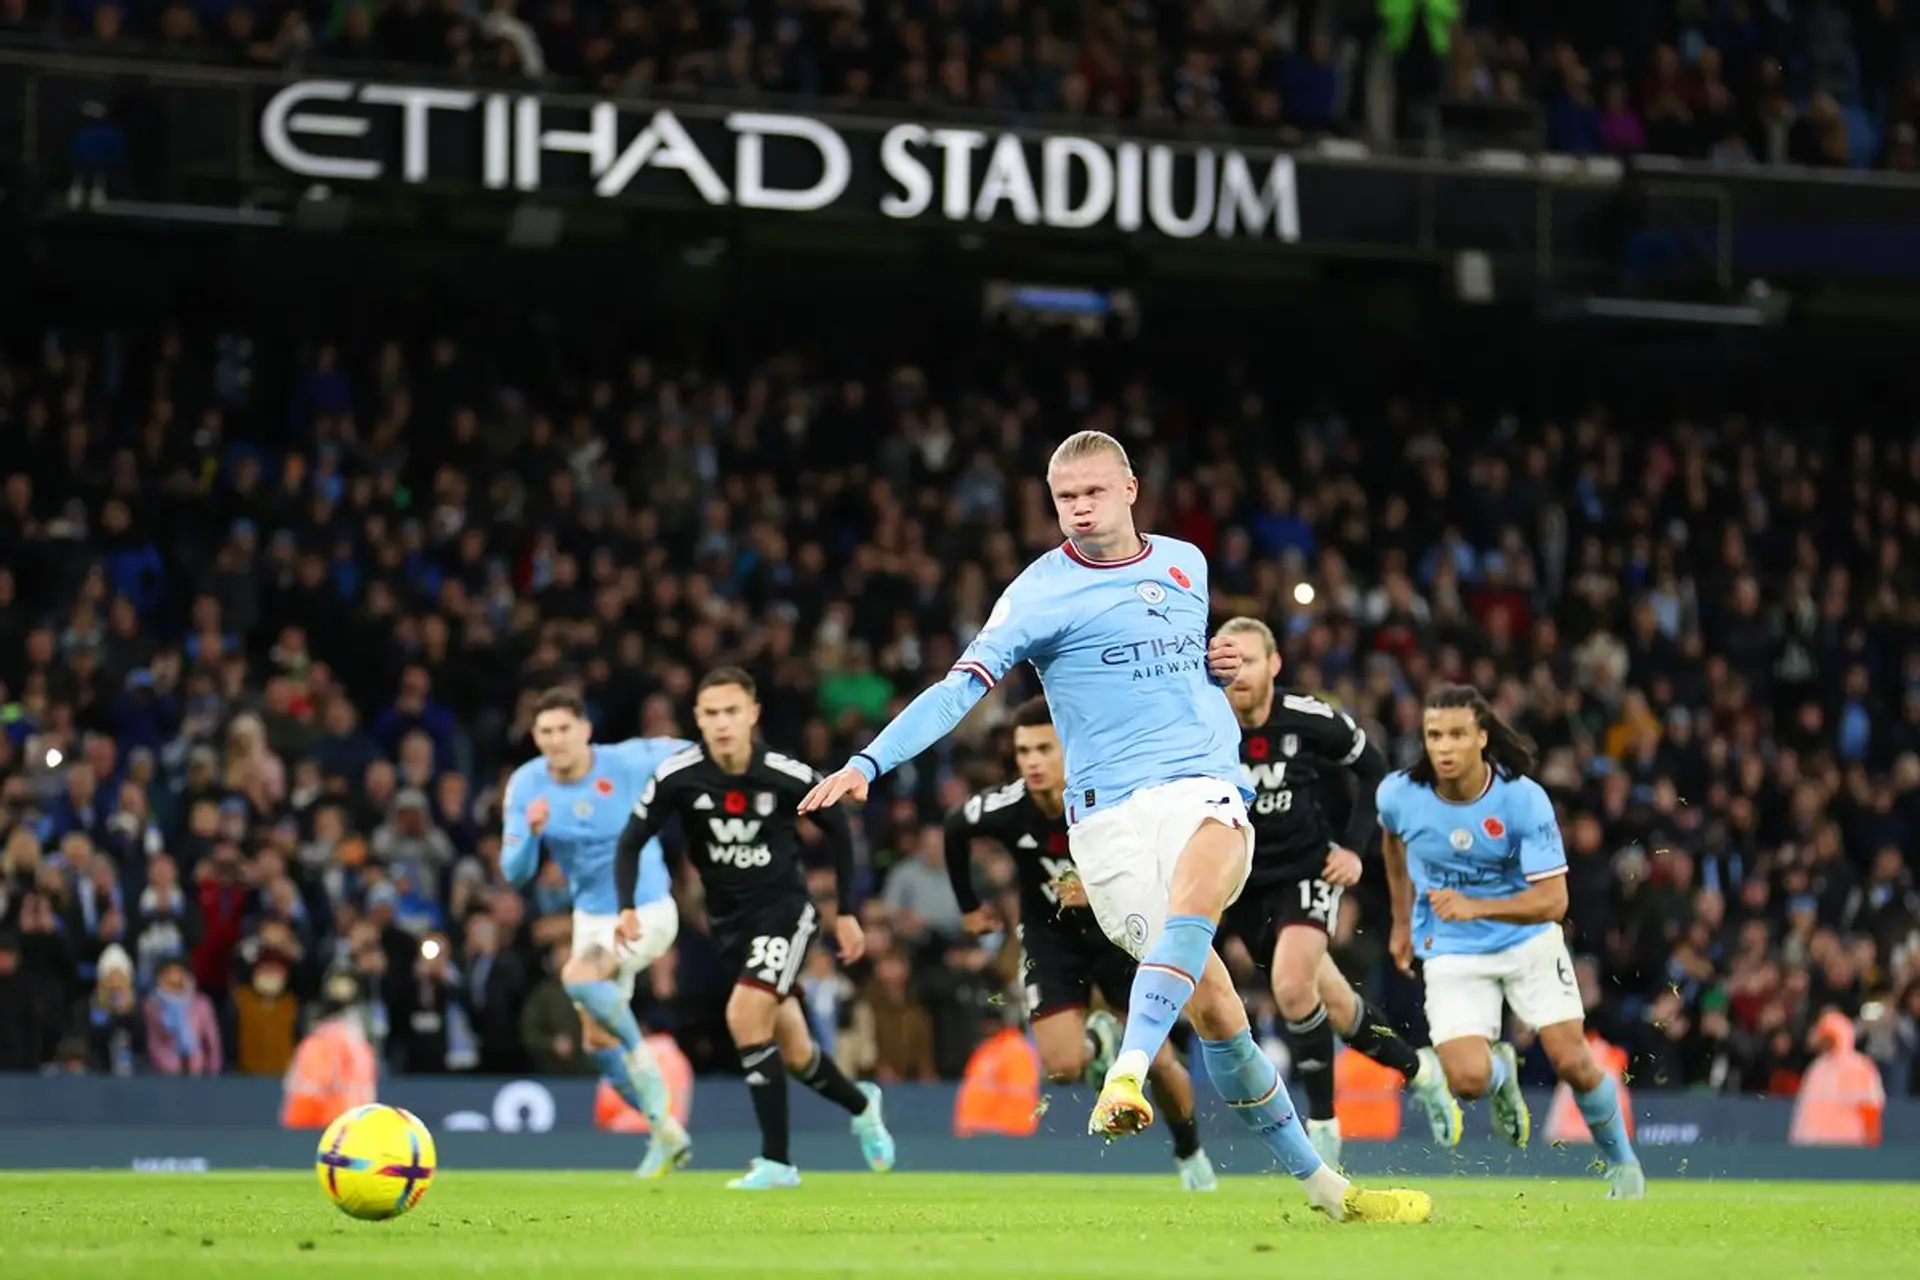 Fulham vs Manchester City: Predictions, odds and best tips